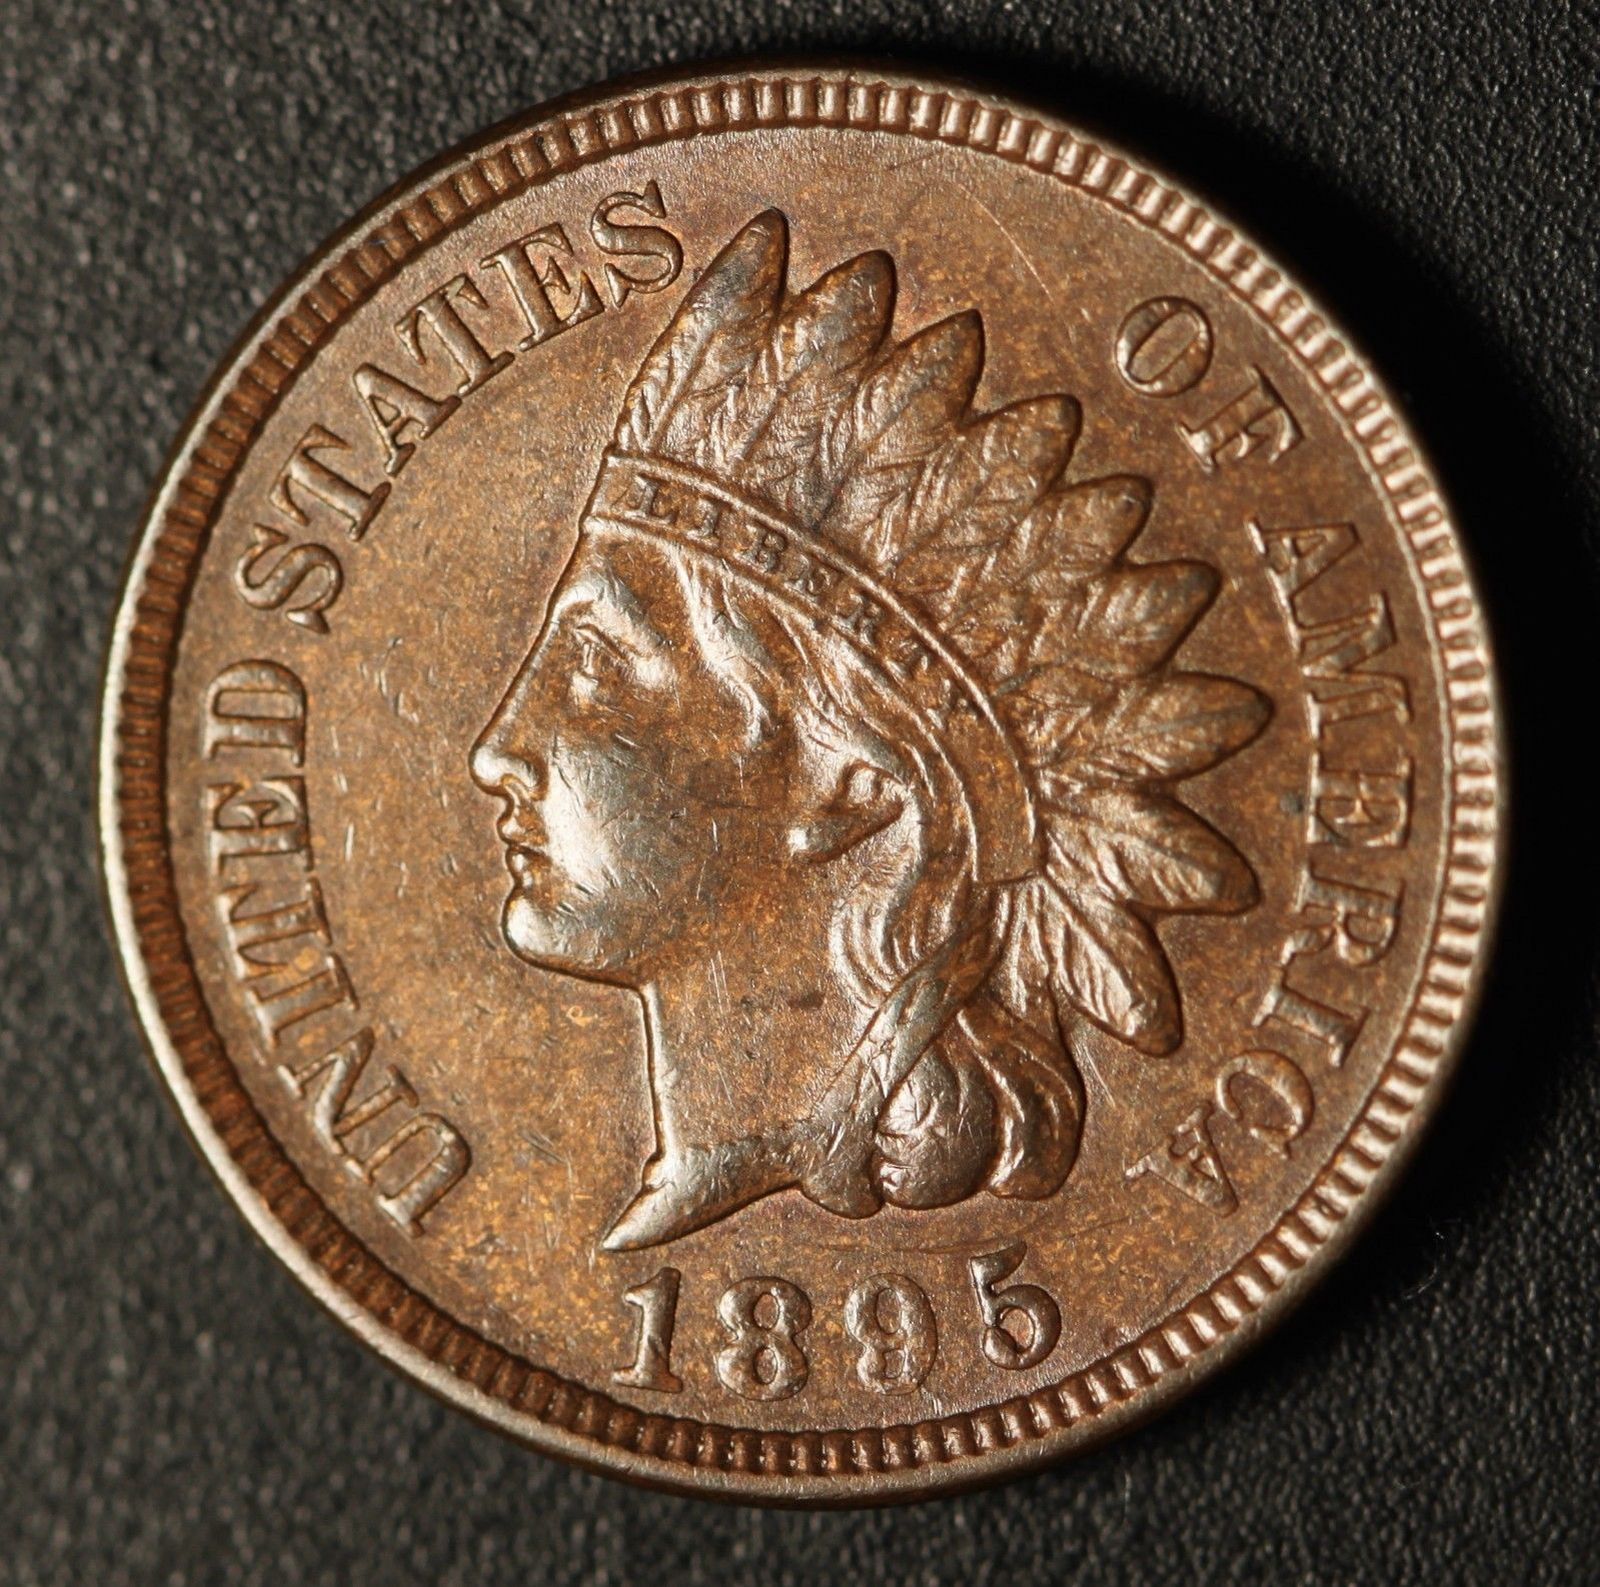 1895 RPD-012 - Indian Head Penny - Photo by Ed Nathanson